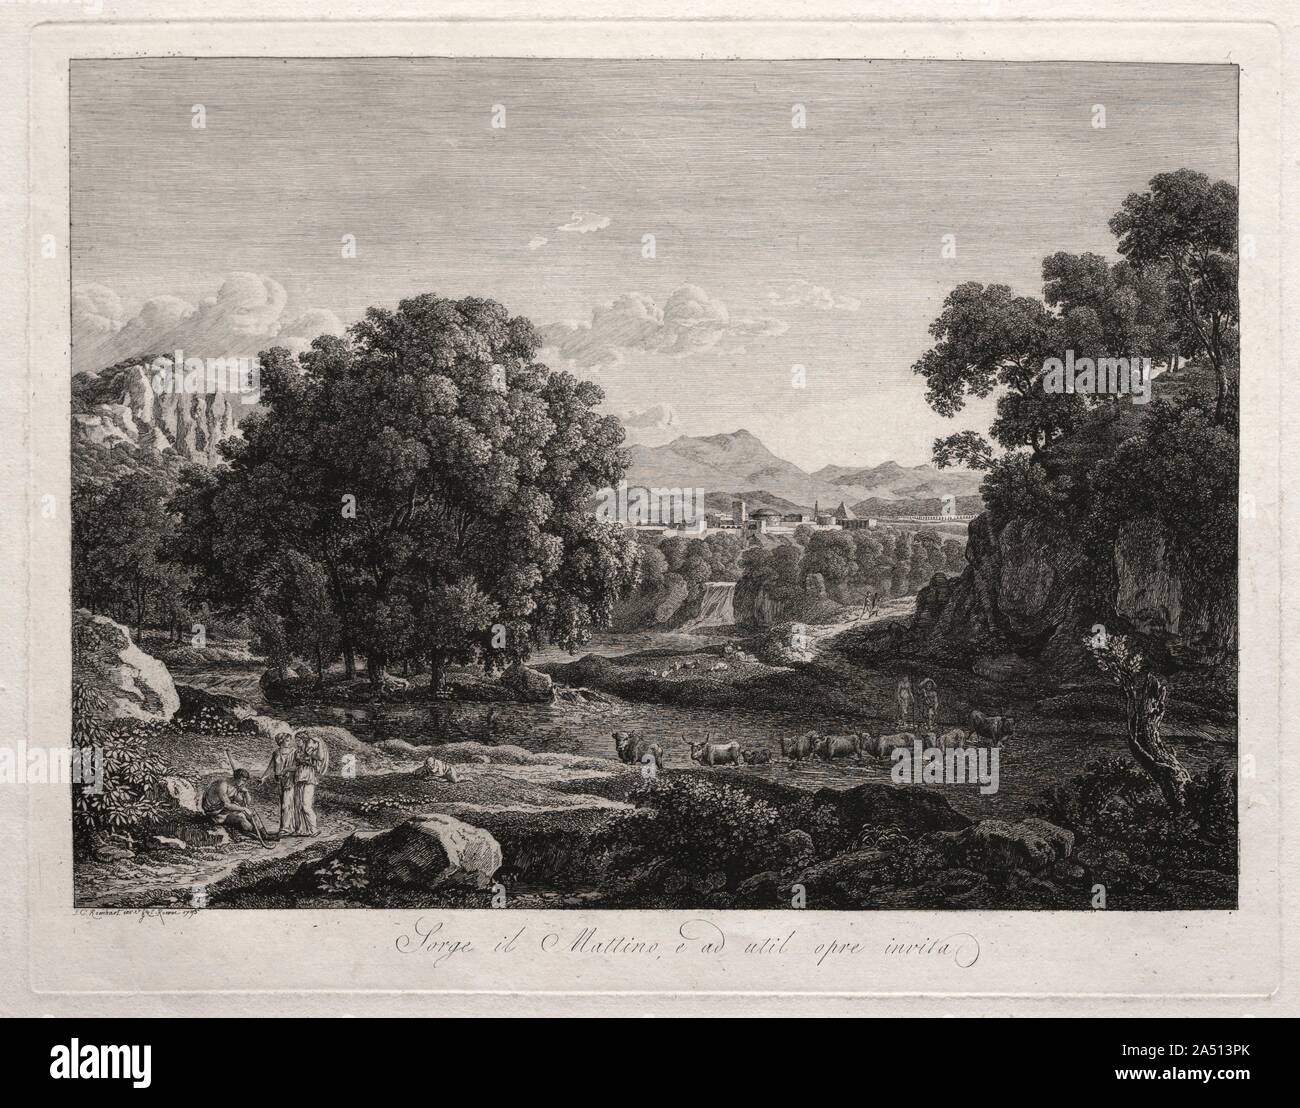 Heroic Landscape: Cattle Crossing the River, 1795. Stock Photo